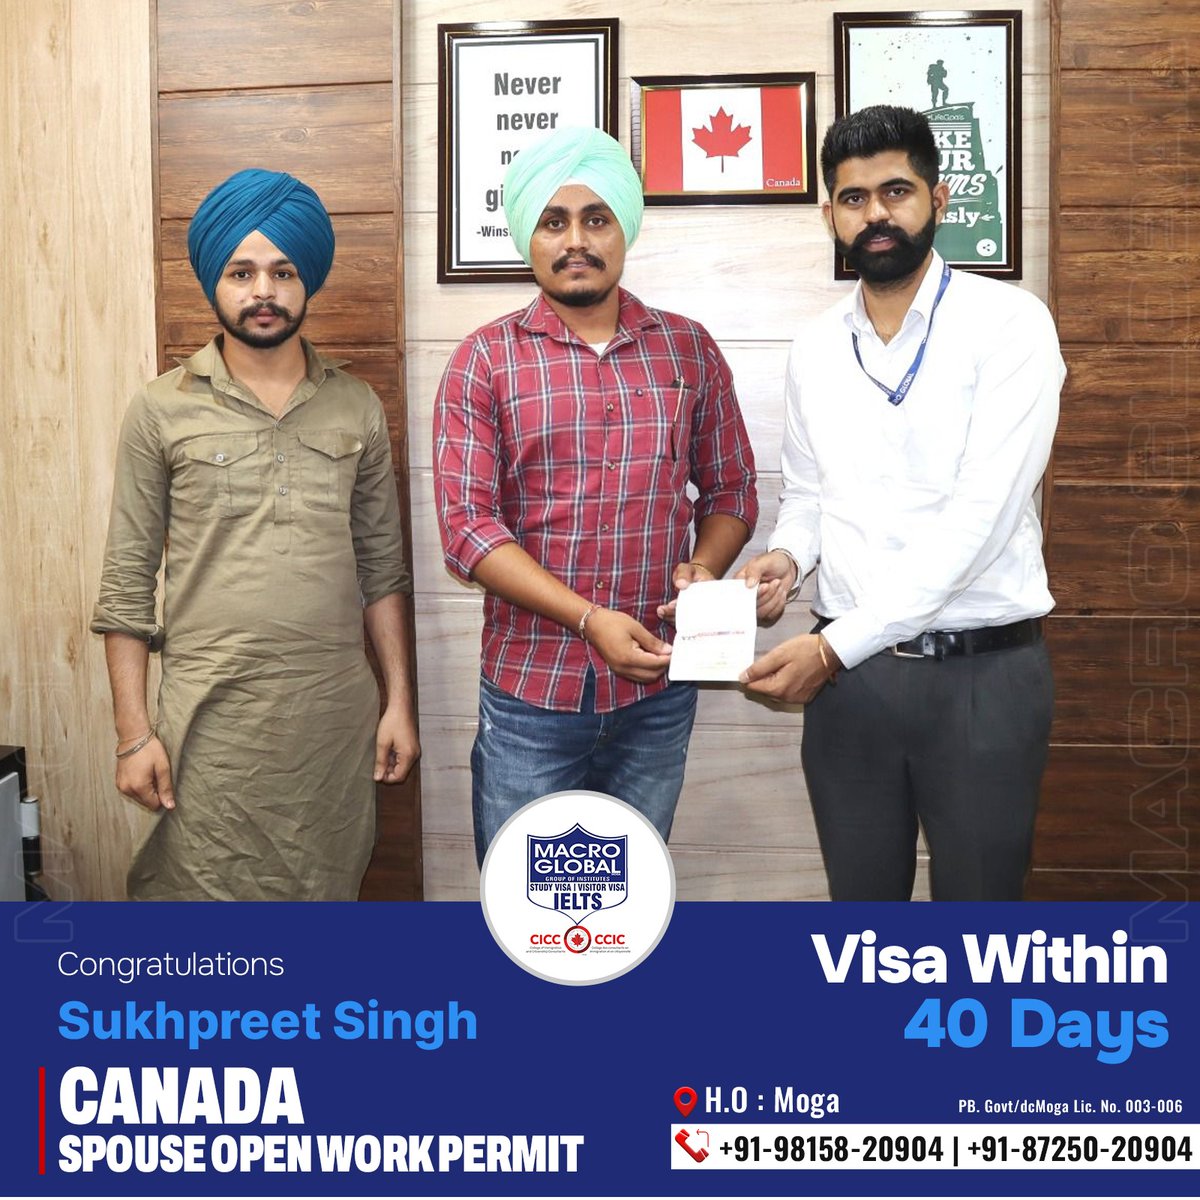 Sukhpreet Singh's Canada Spouse Open Work Permit has been approved within 40 days through Macro Global!

.
#MacroGlobal #GurmilapSinghDalla #Canada #Canadastudyvisa #canadaopenworkpermit #spousevisa #Visitorvisa #Visa #IELTS #IELTSTraining #EnrollNow #Immigration